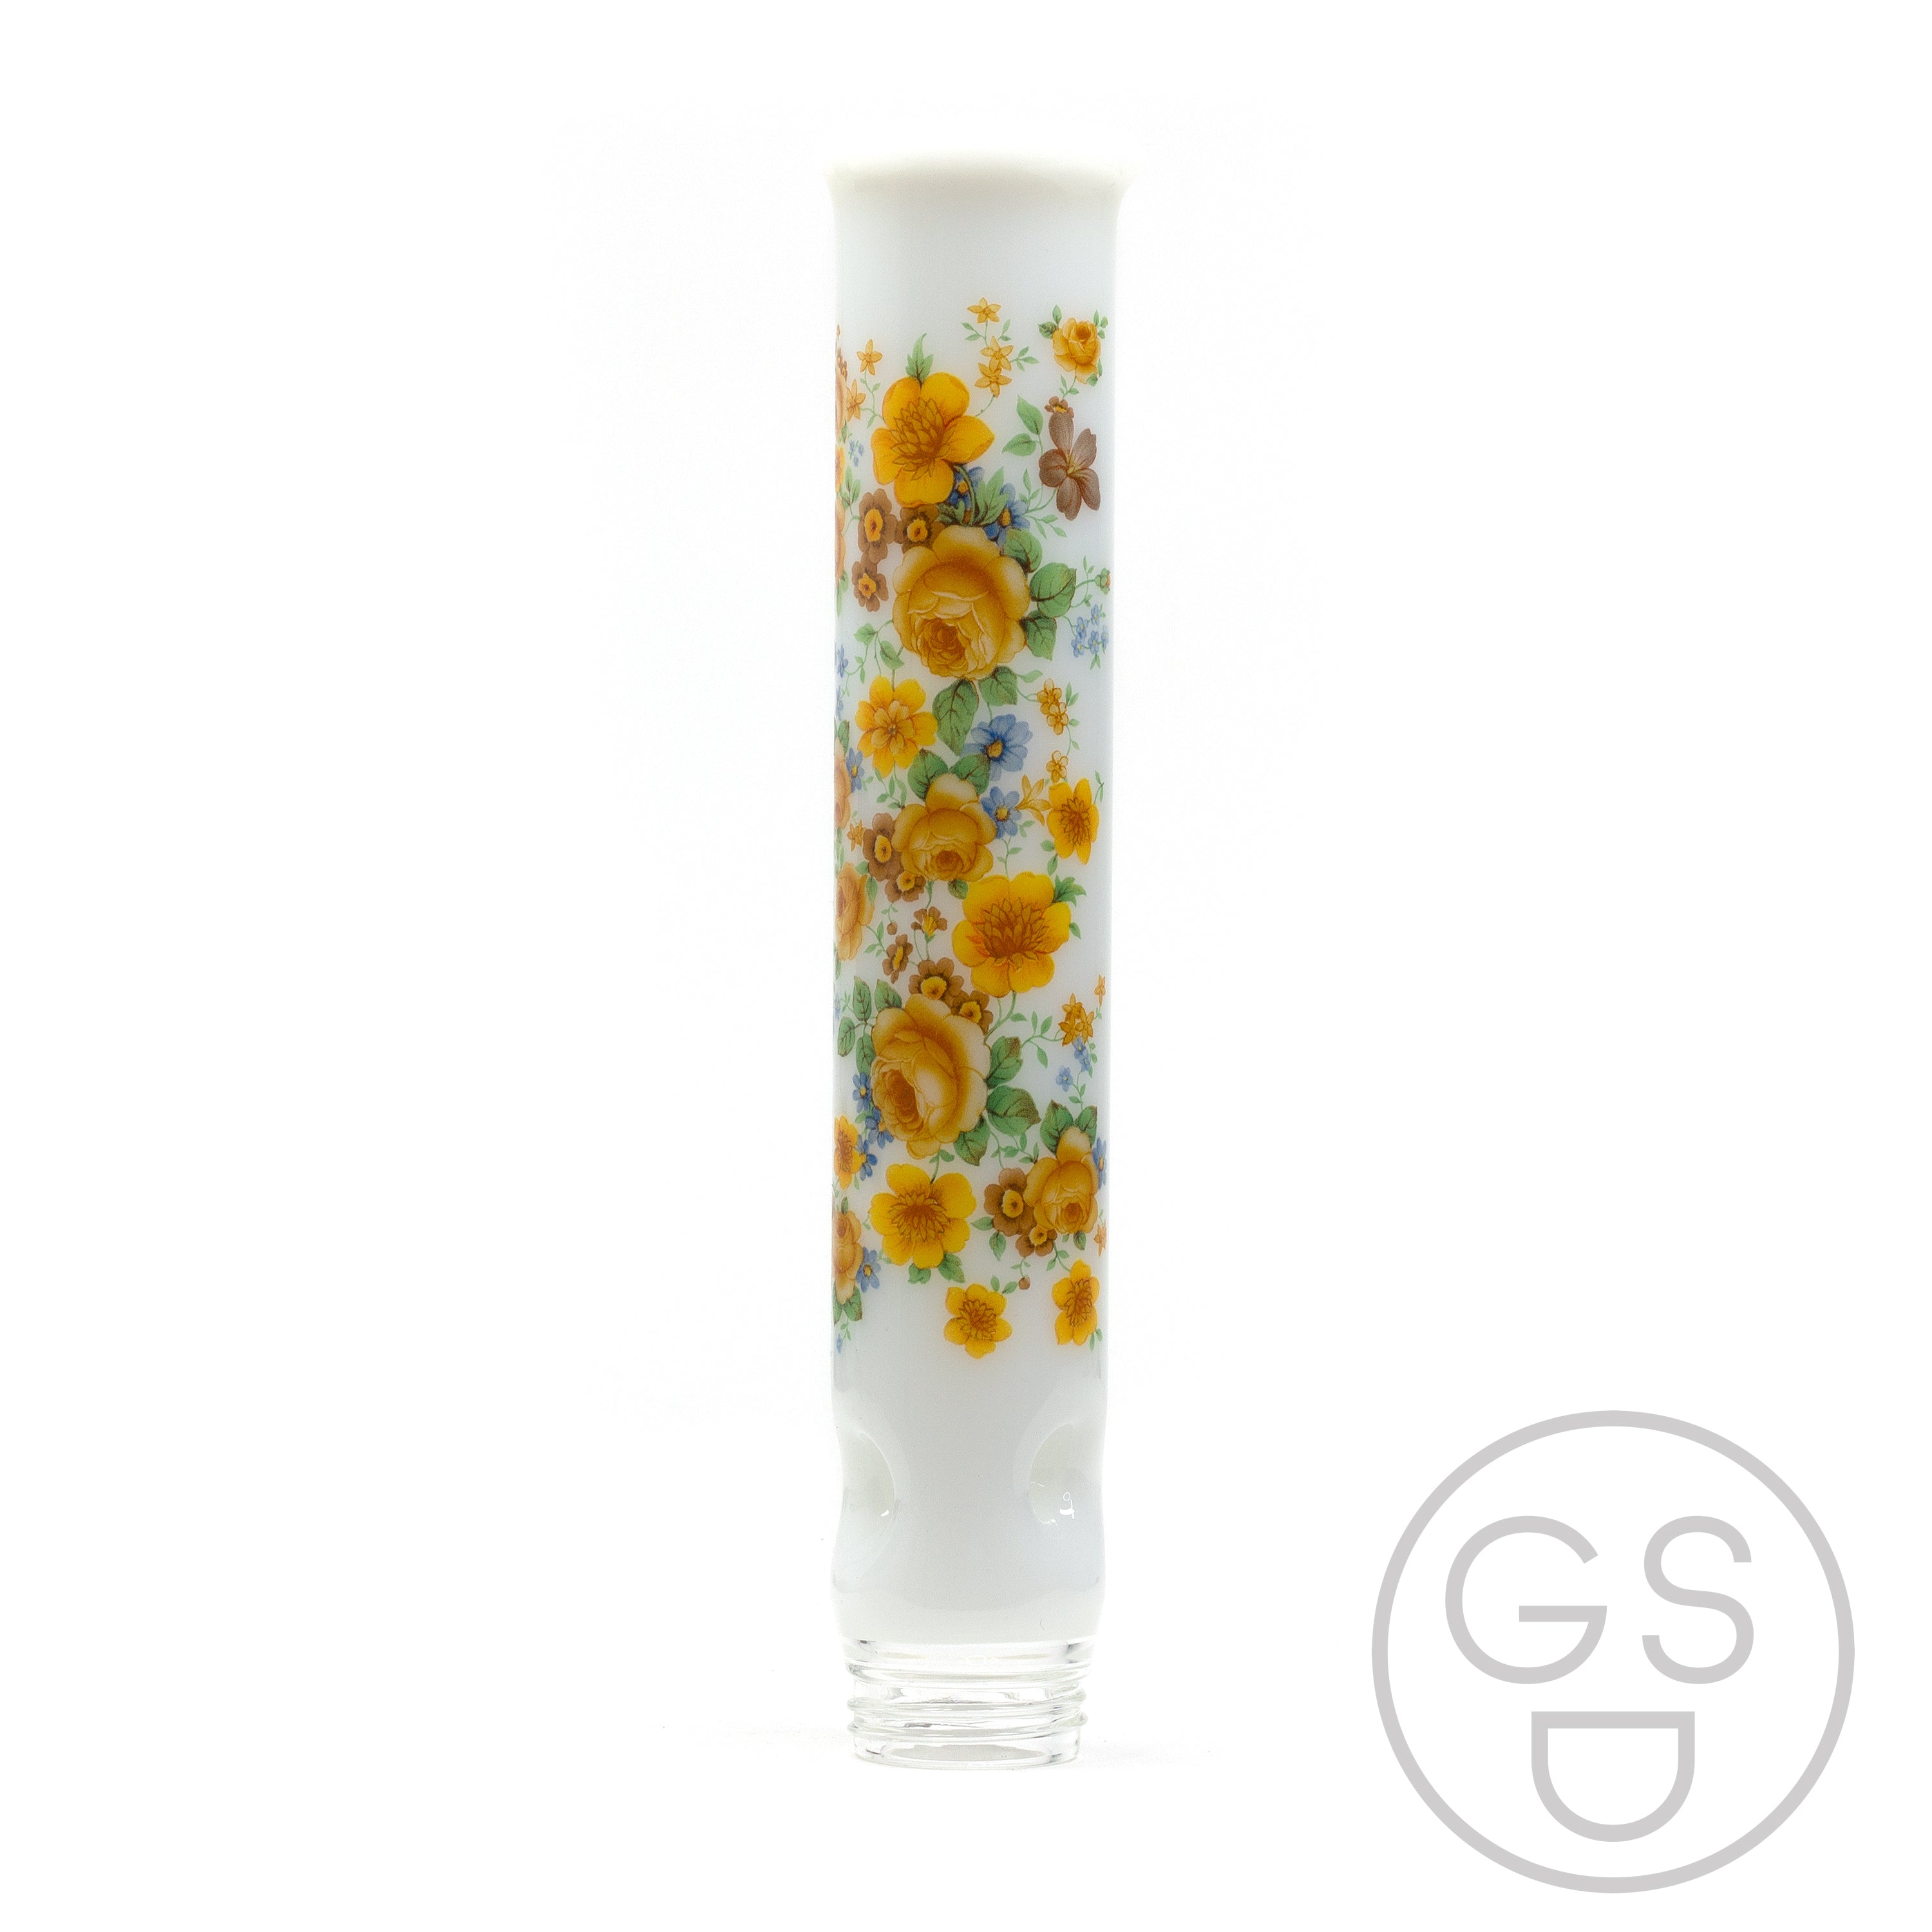 Prism Modular Waterpipe Tall Mouthpiece - Vintage Floral / White